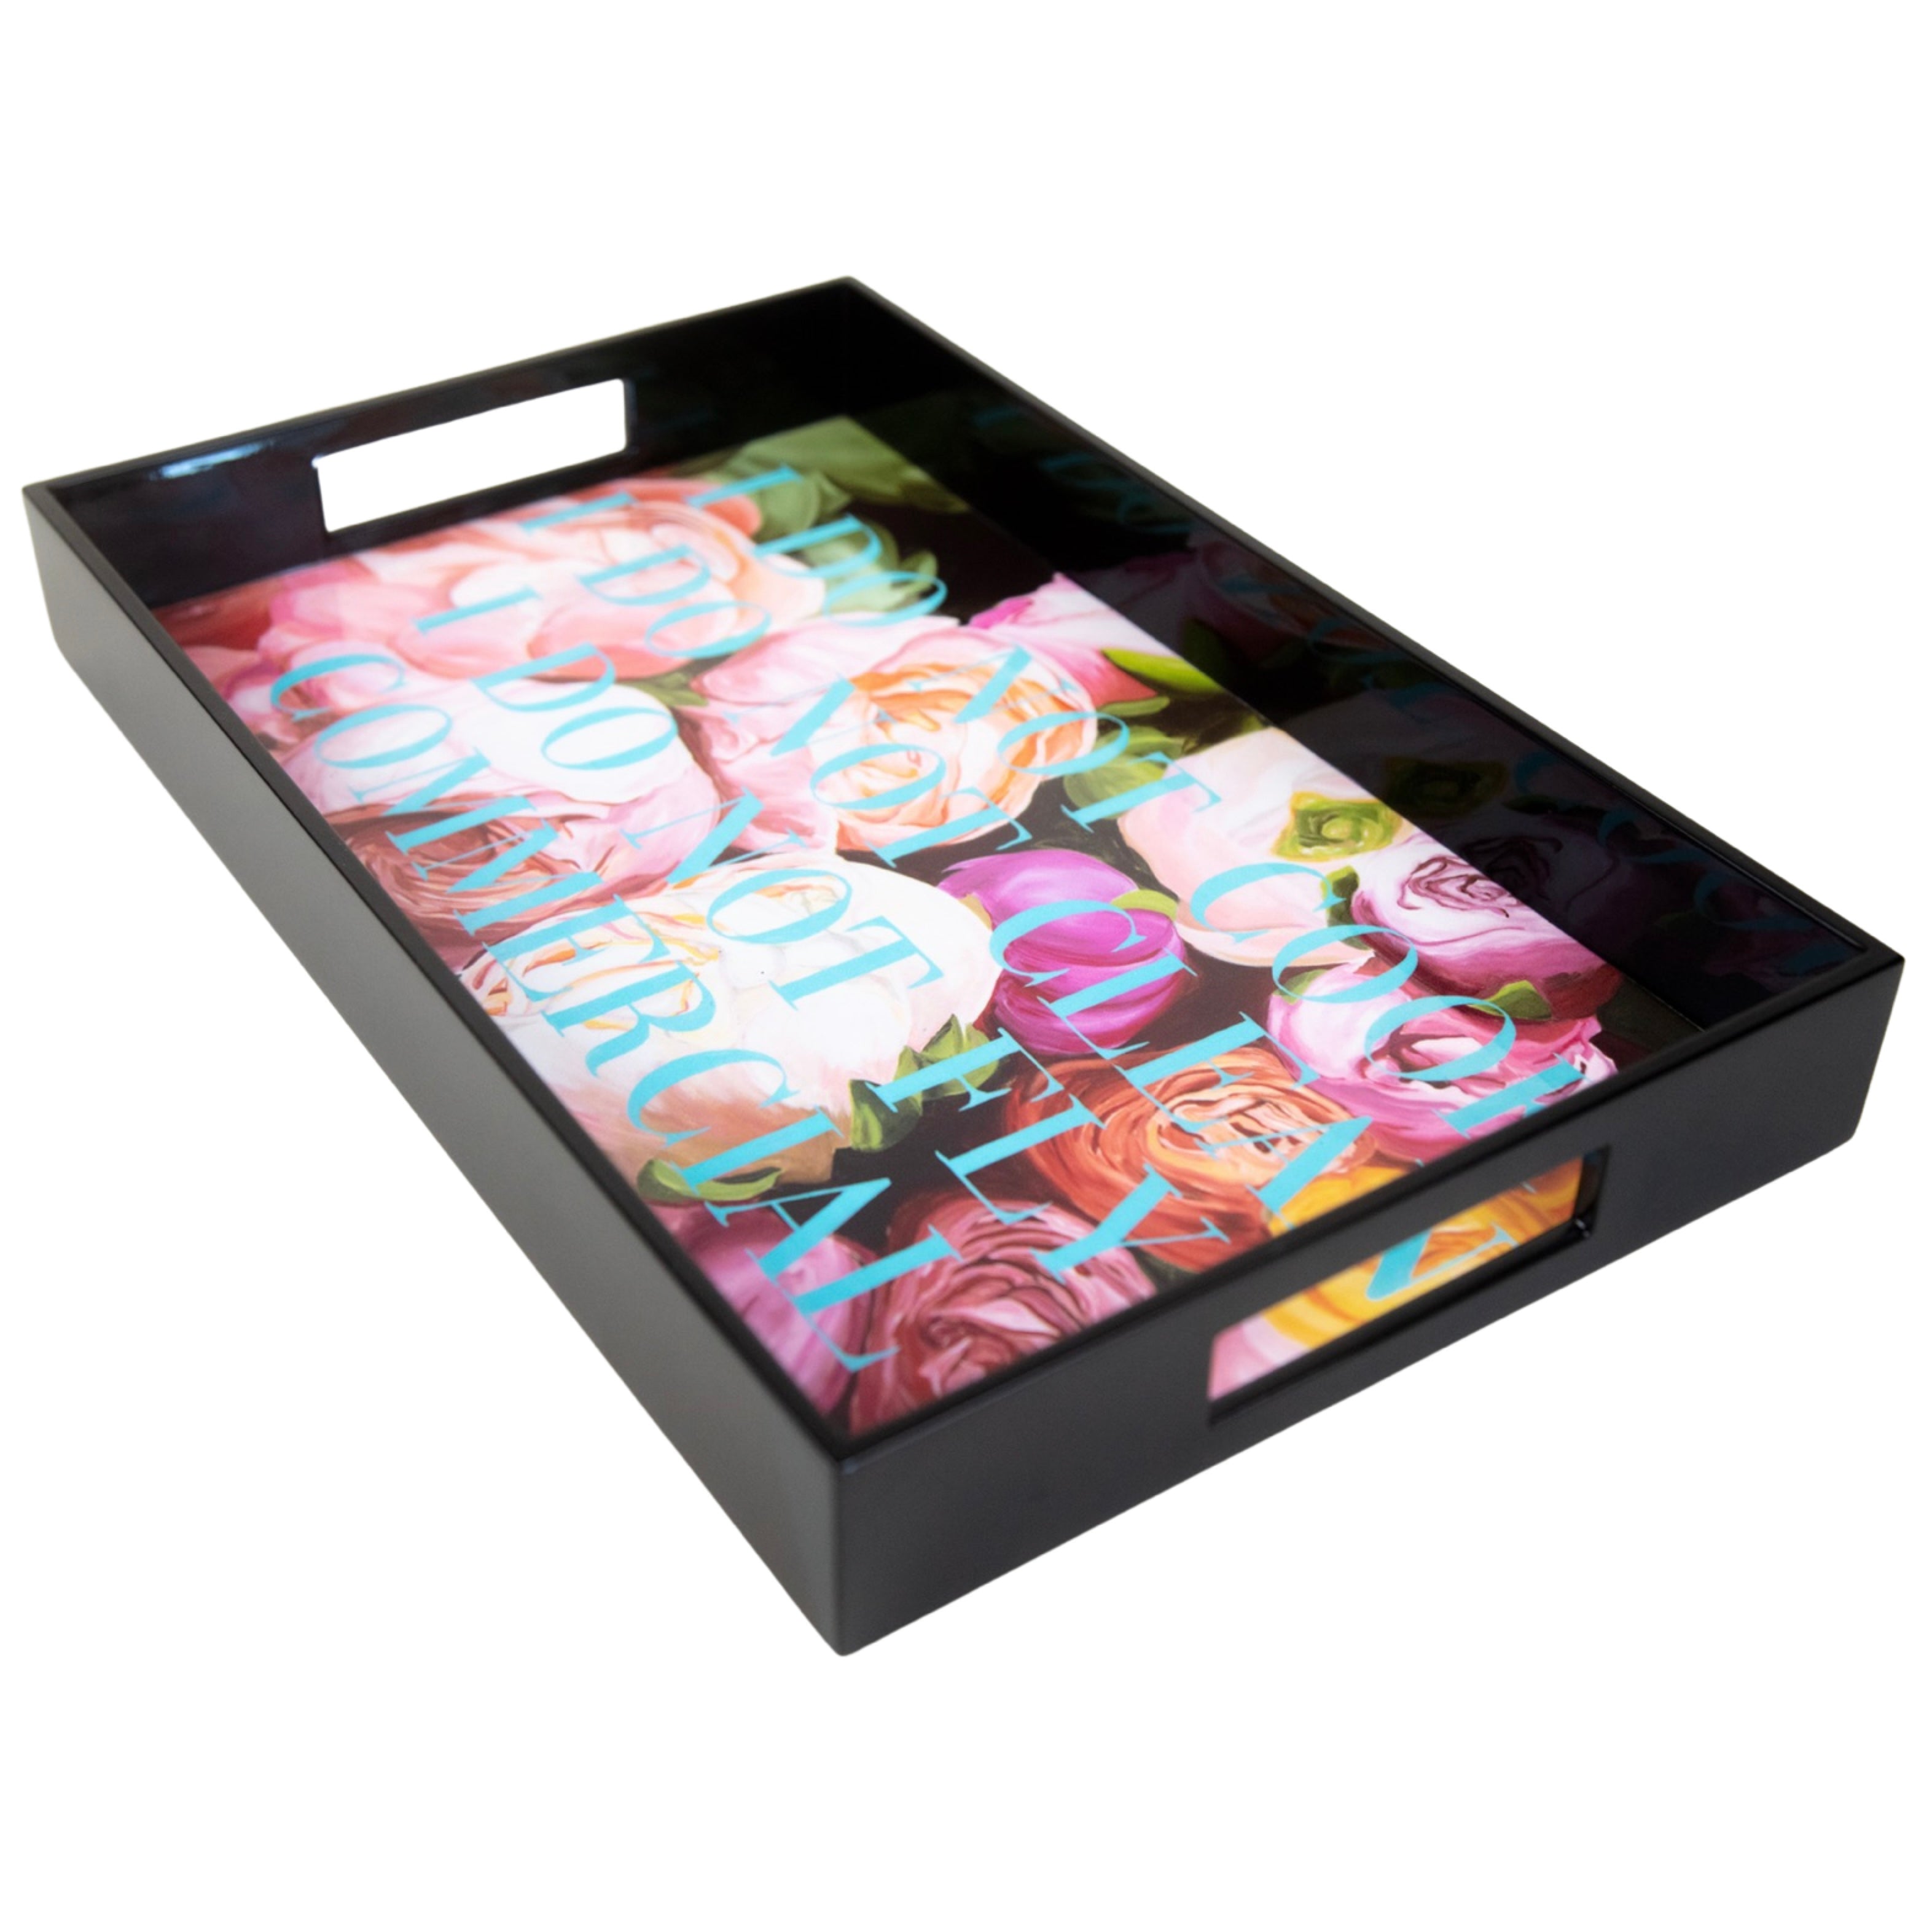 This beautifully hand-crafted lacquered wooden tray is a first for me and I LOVE it!! Use it to serve cocktails, party favors or WHATEVER you like!! It features artwork from my 